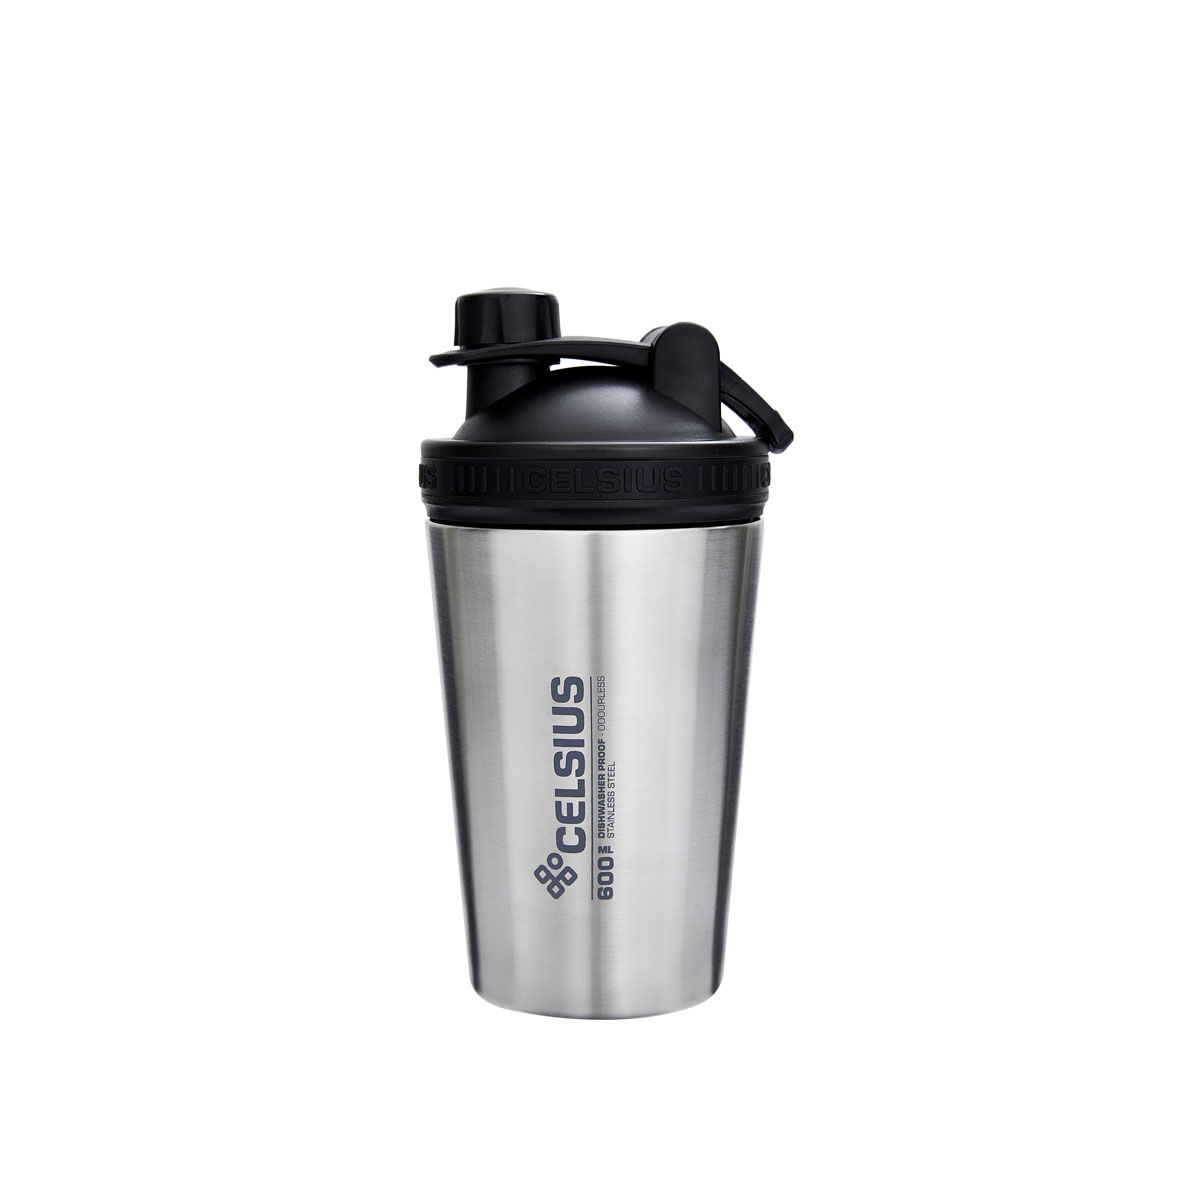 Stainless Steel Protein Blender, Stainless Steel Quickly Tools